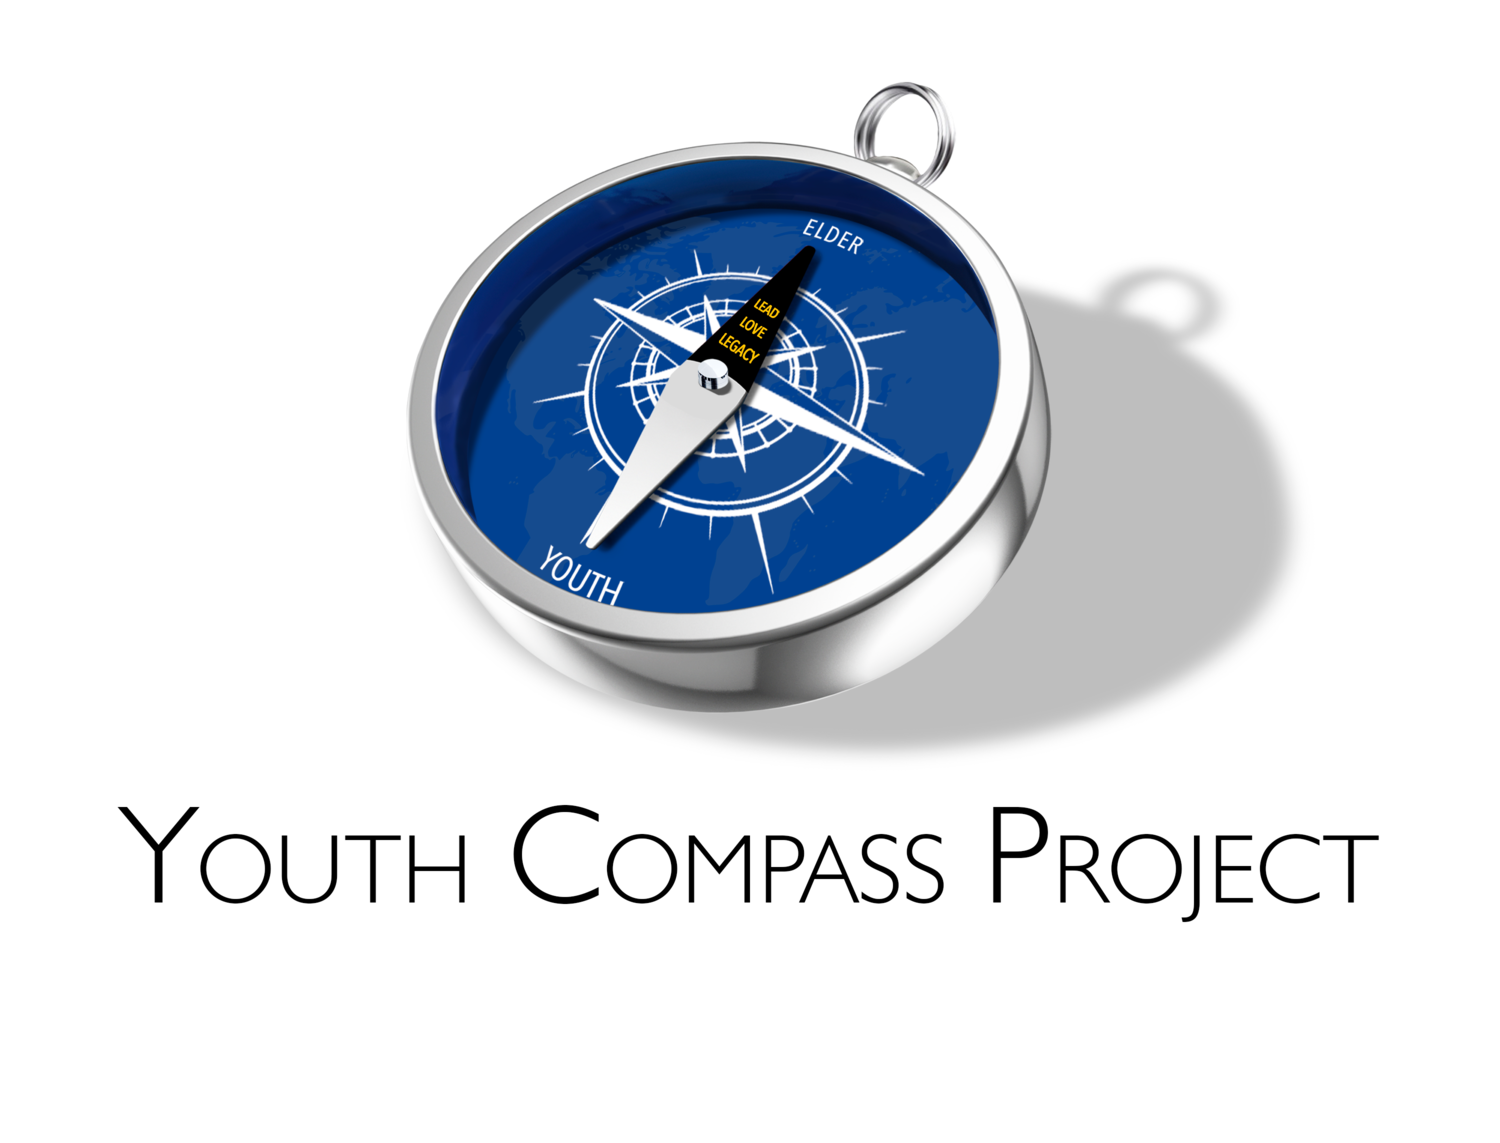 The Youth Compass Project